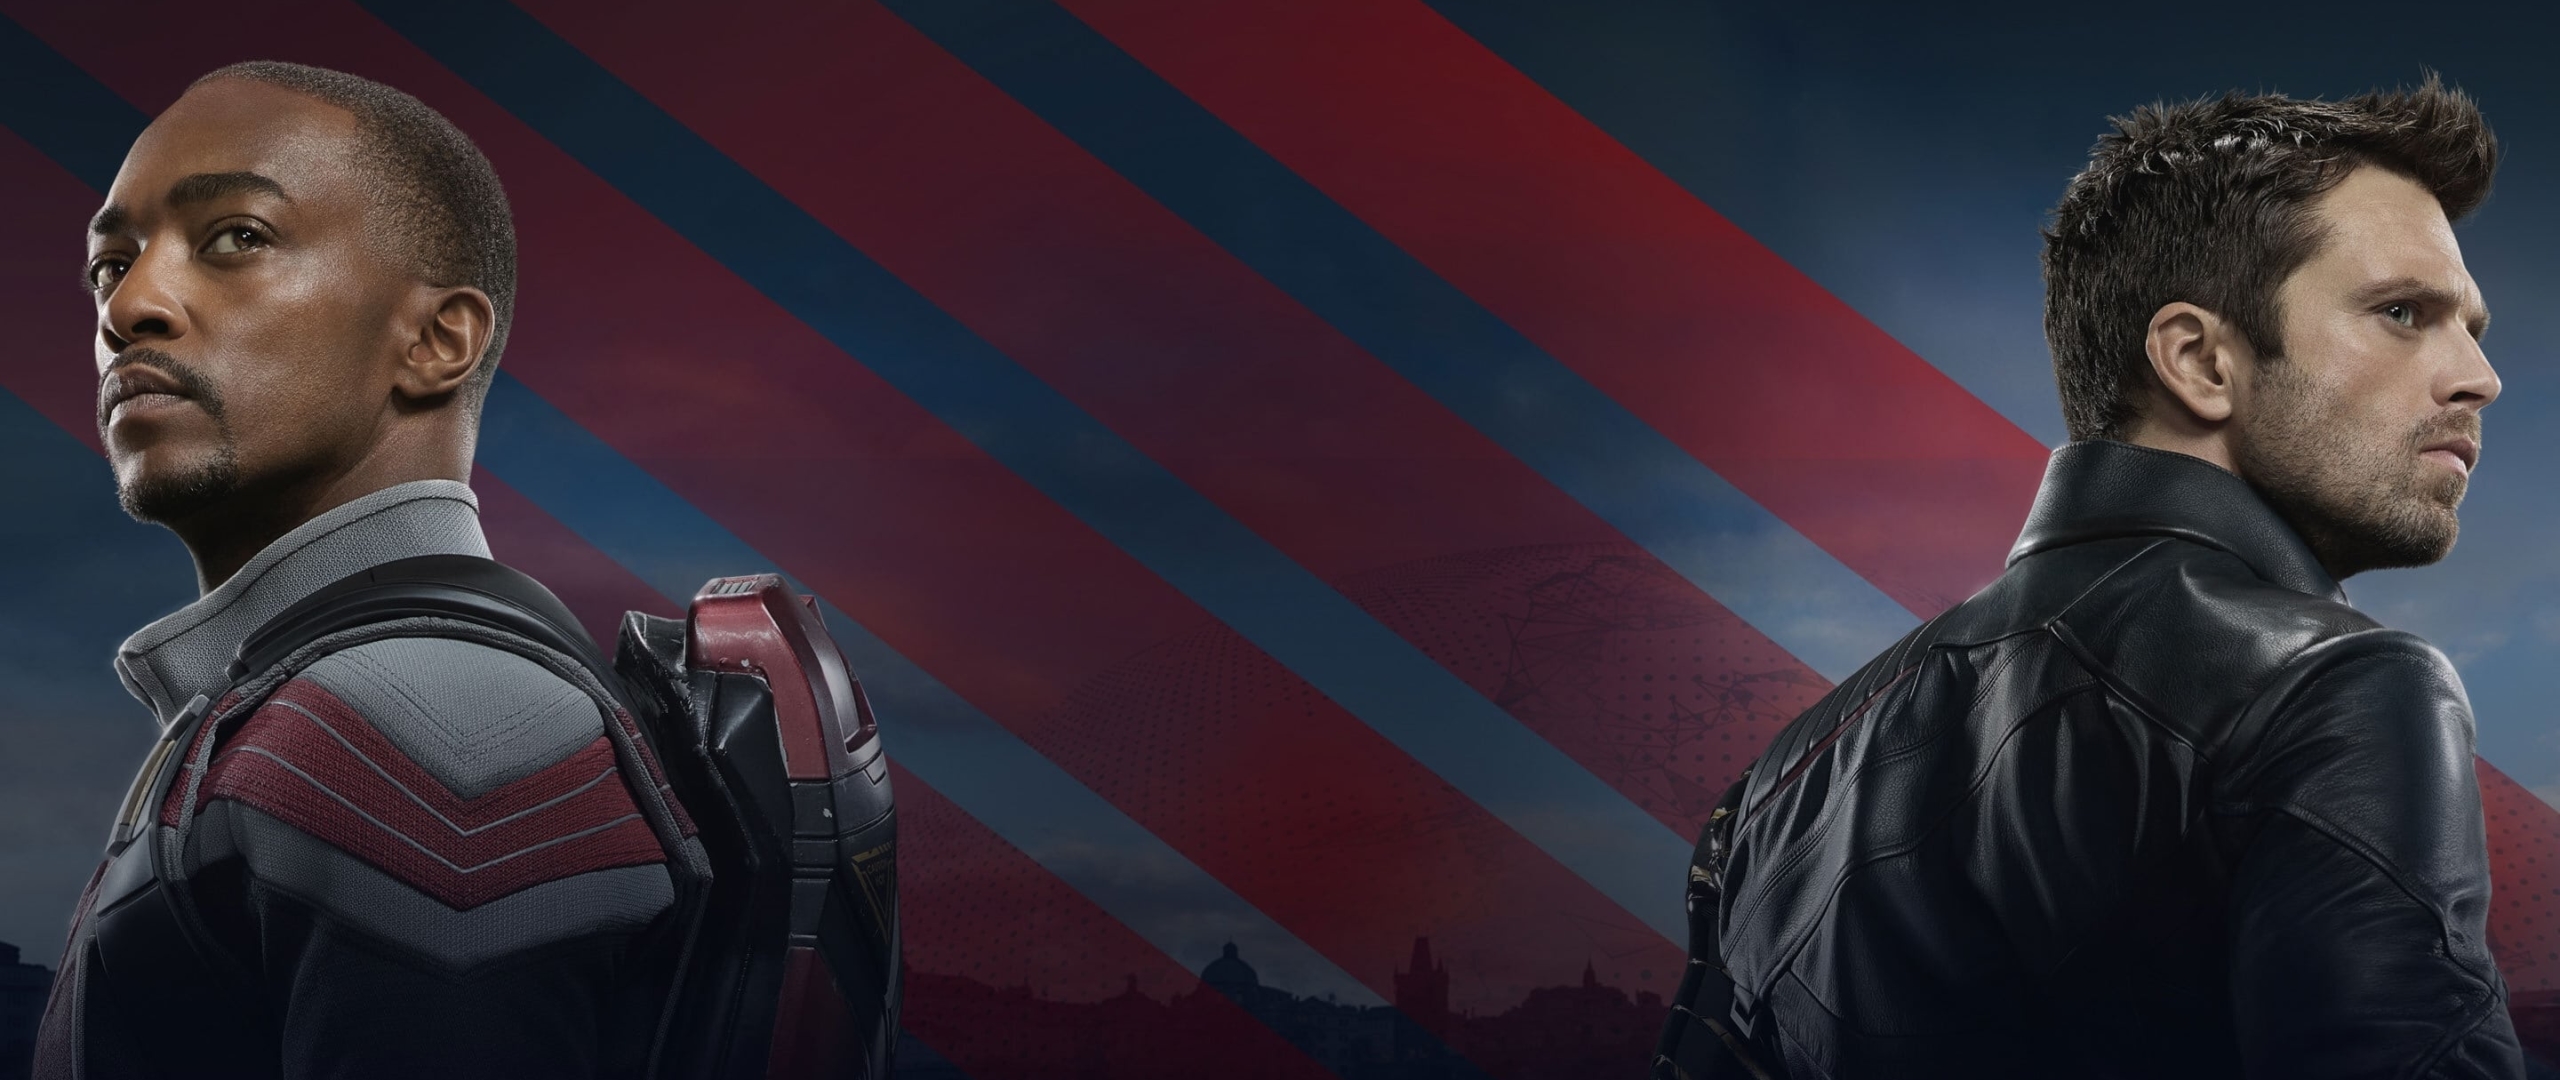 2560x1080 Poster of The Falcon and the Winter Soldier 2560x1080